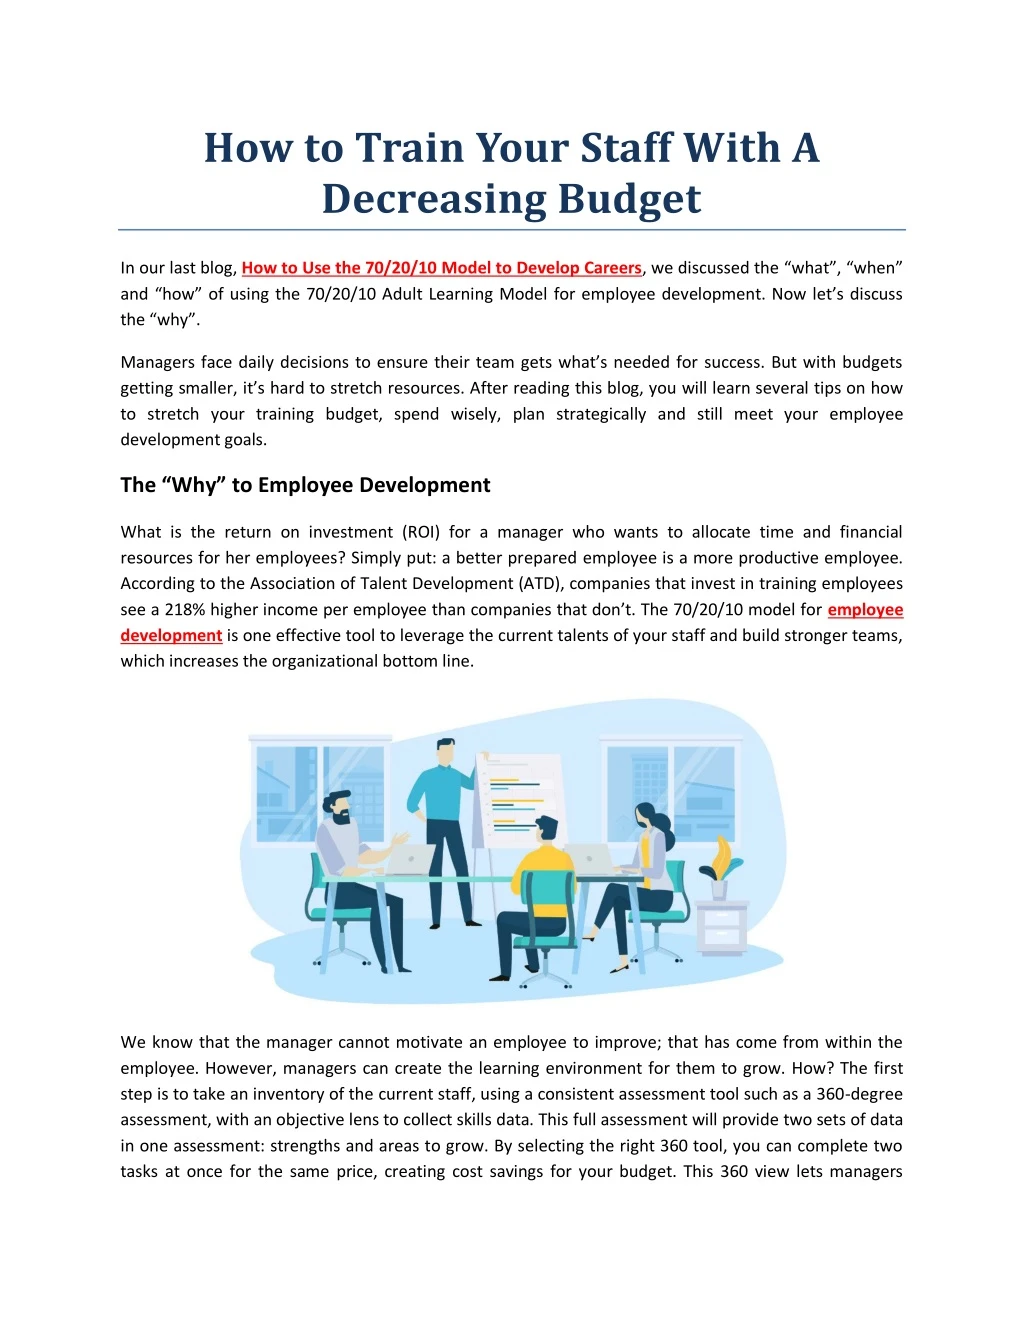 how to train your staff with a decreasing budget